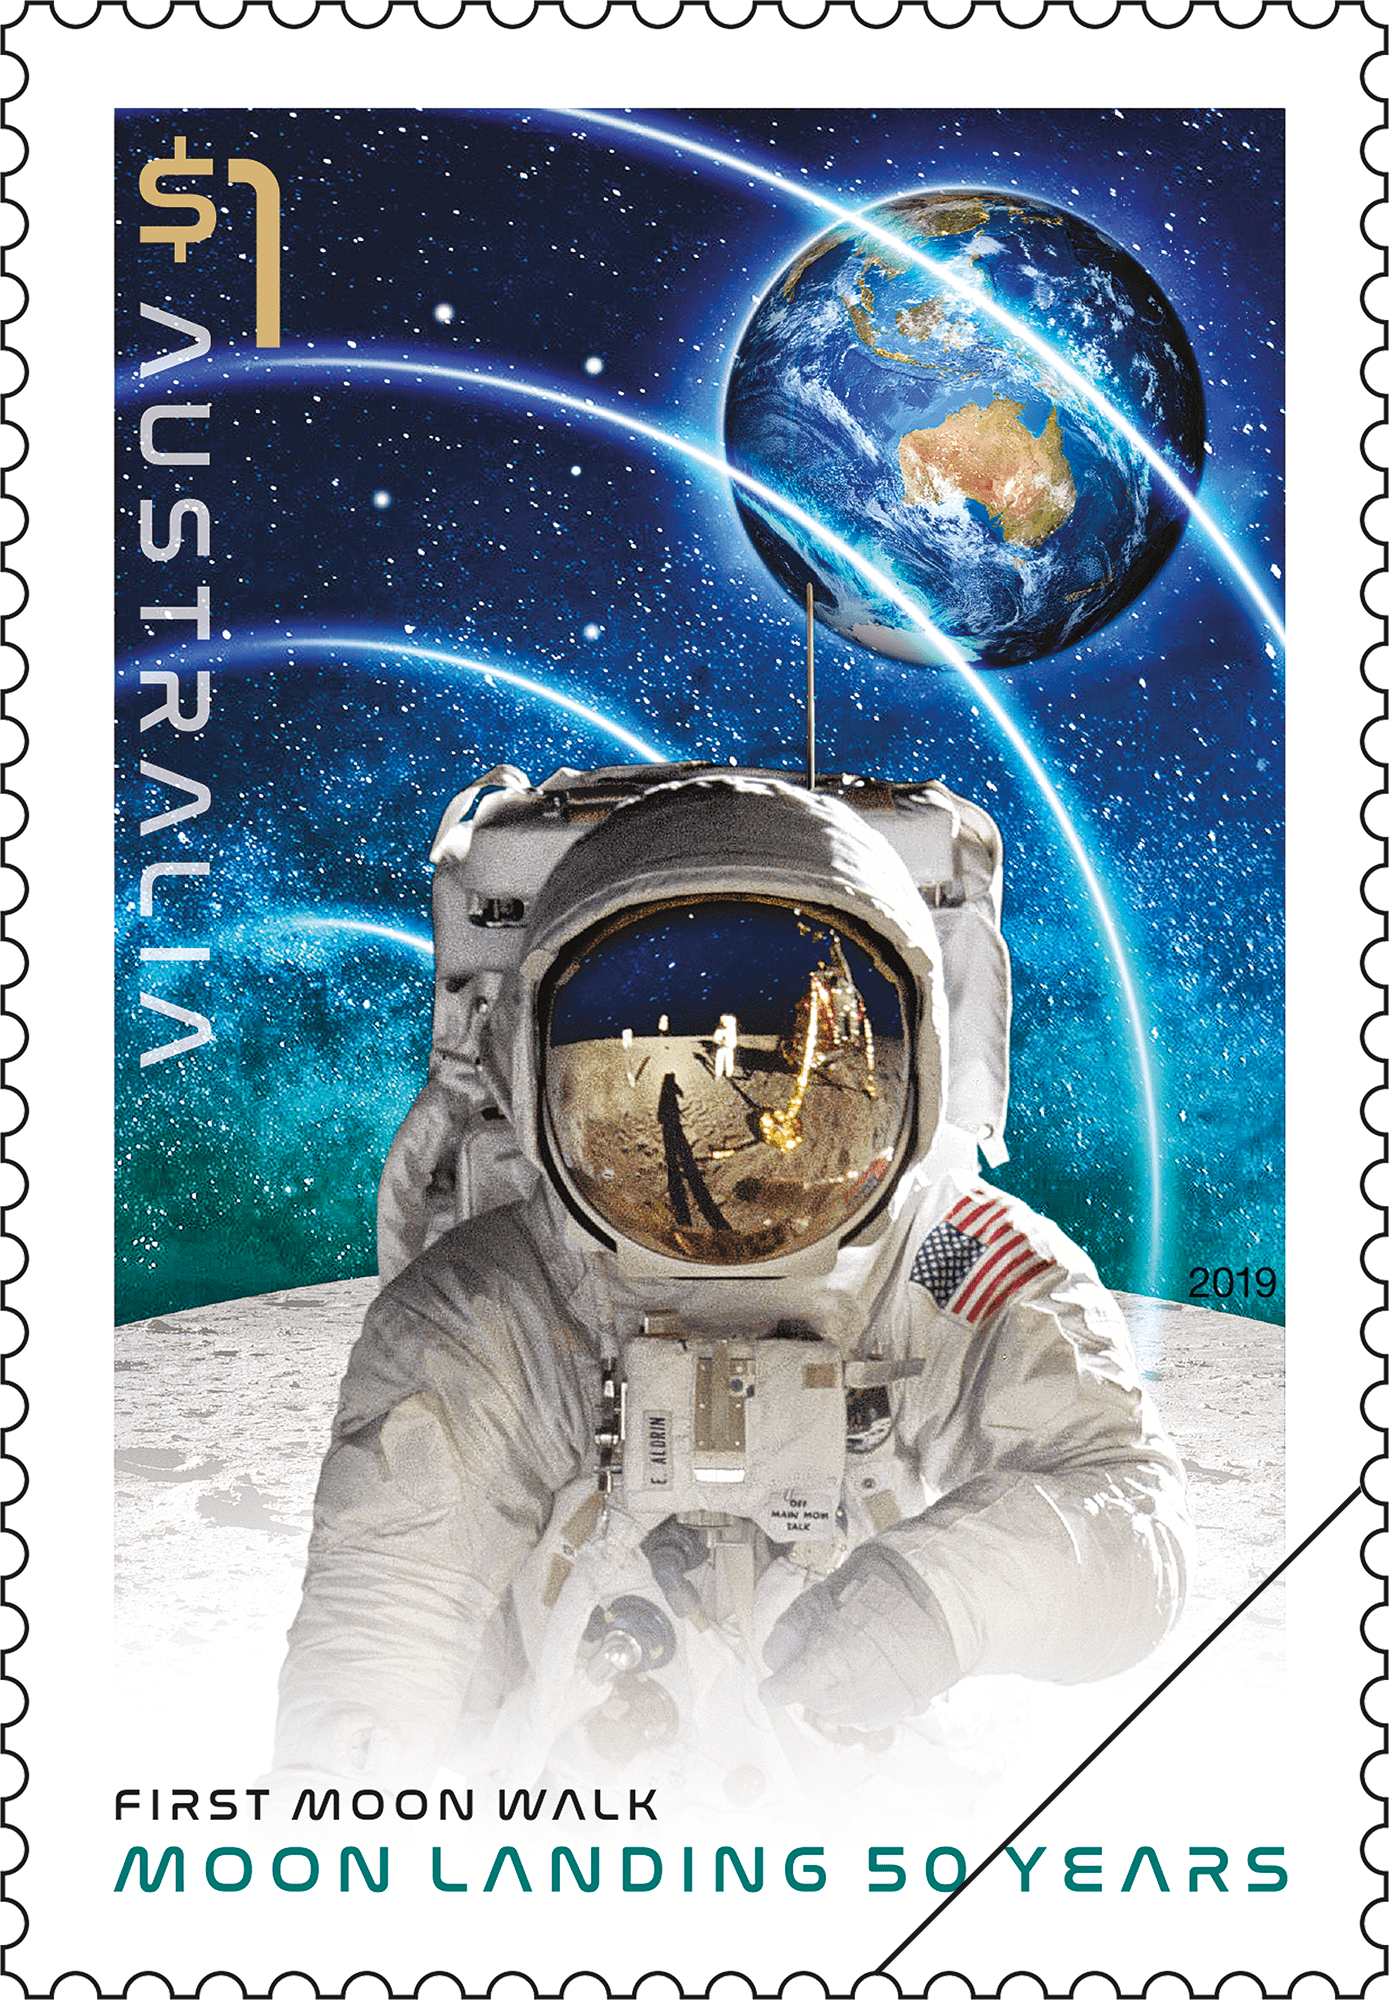 1969 APOLLO 11 FIRST MAN ON THE MOON Neil Armstrong 50th Anniversary Stamp MINT!